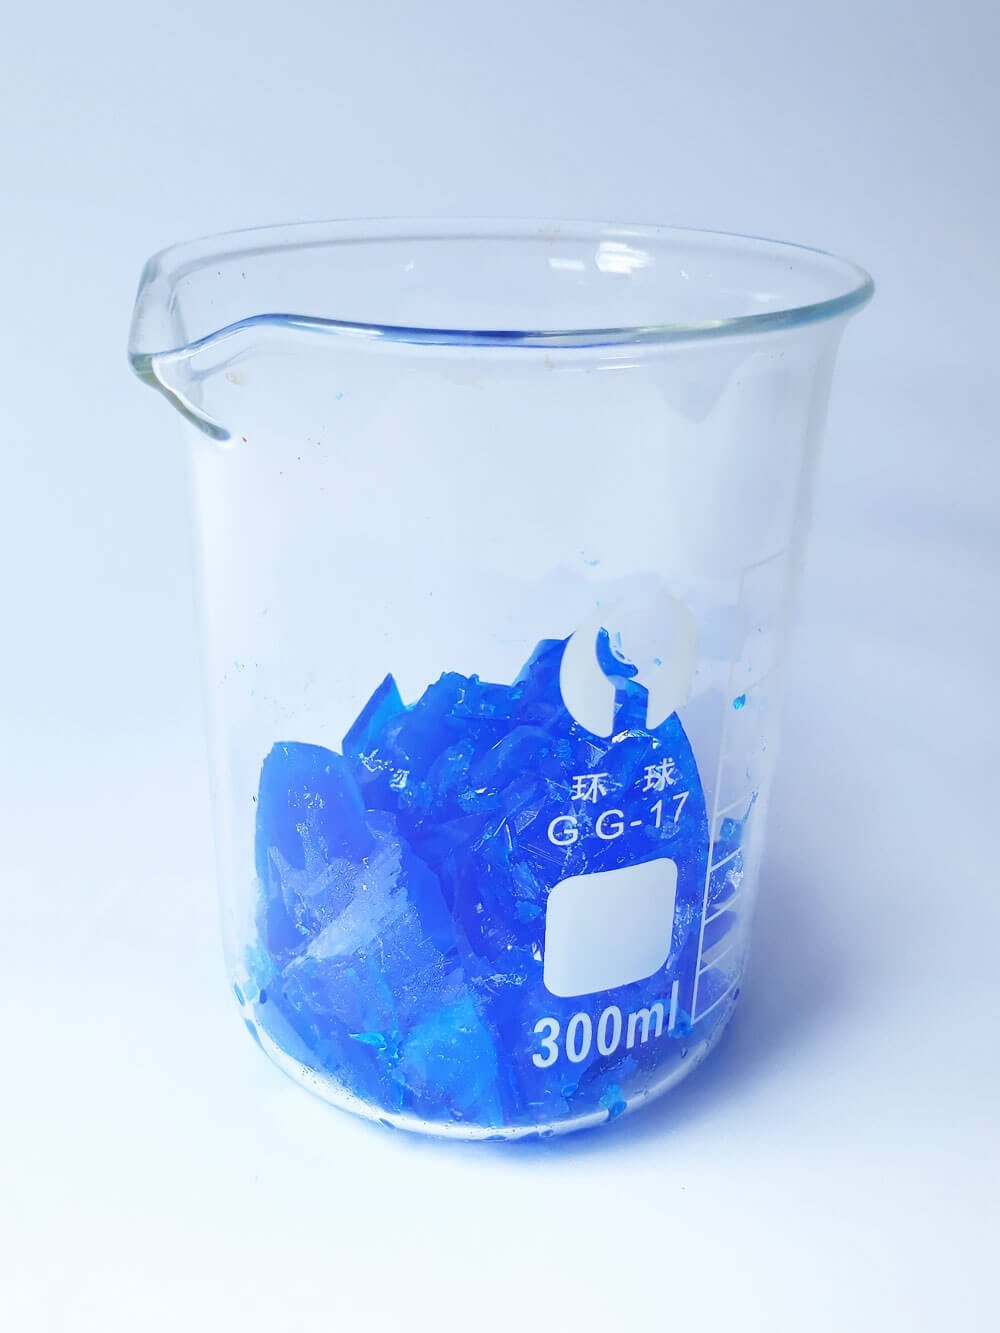 The final yield of purified copper sulfate crystals.